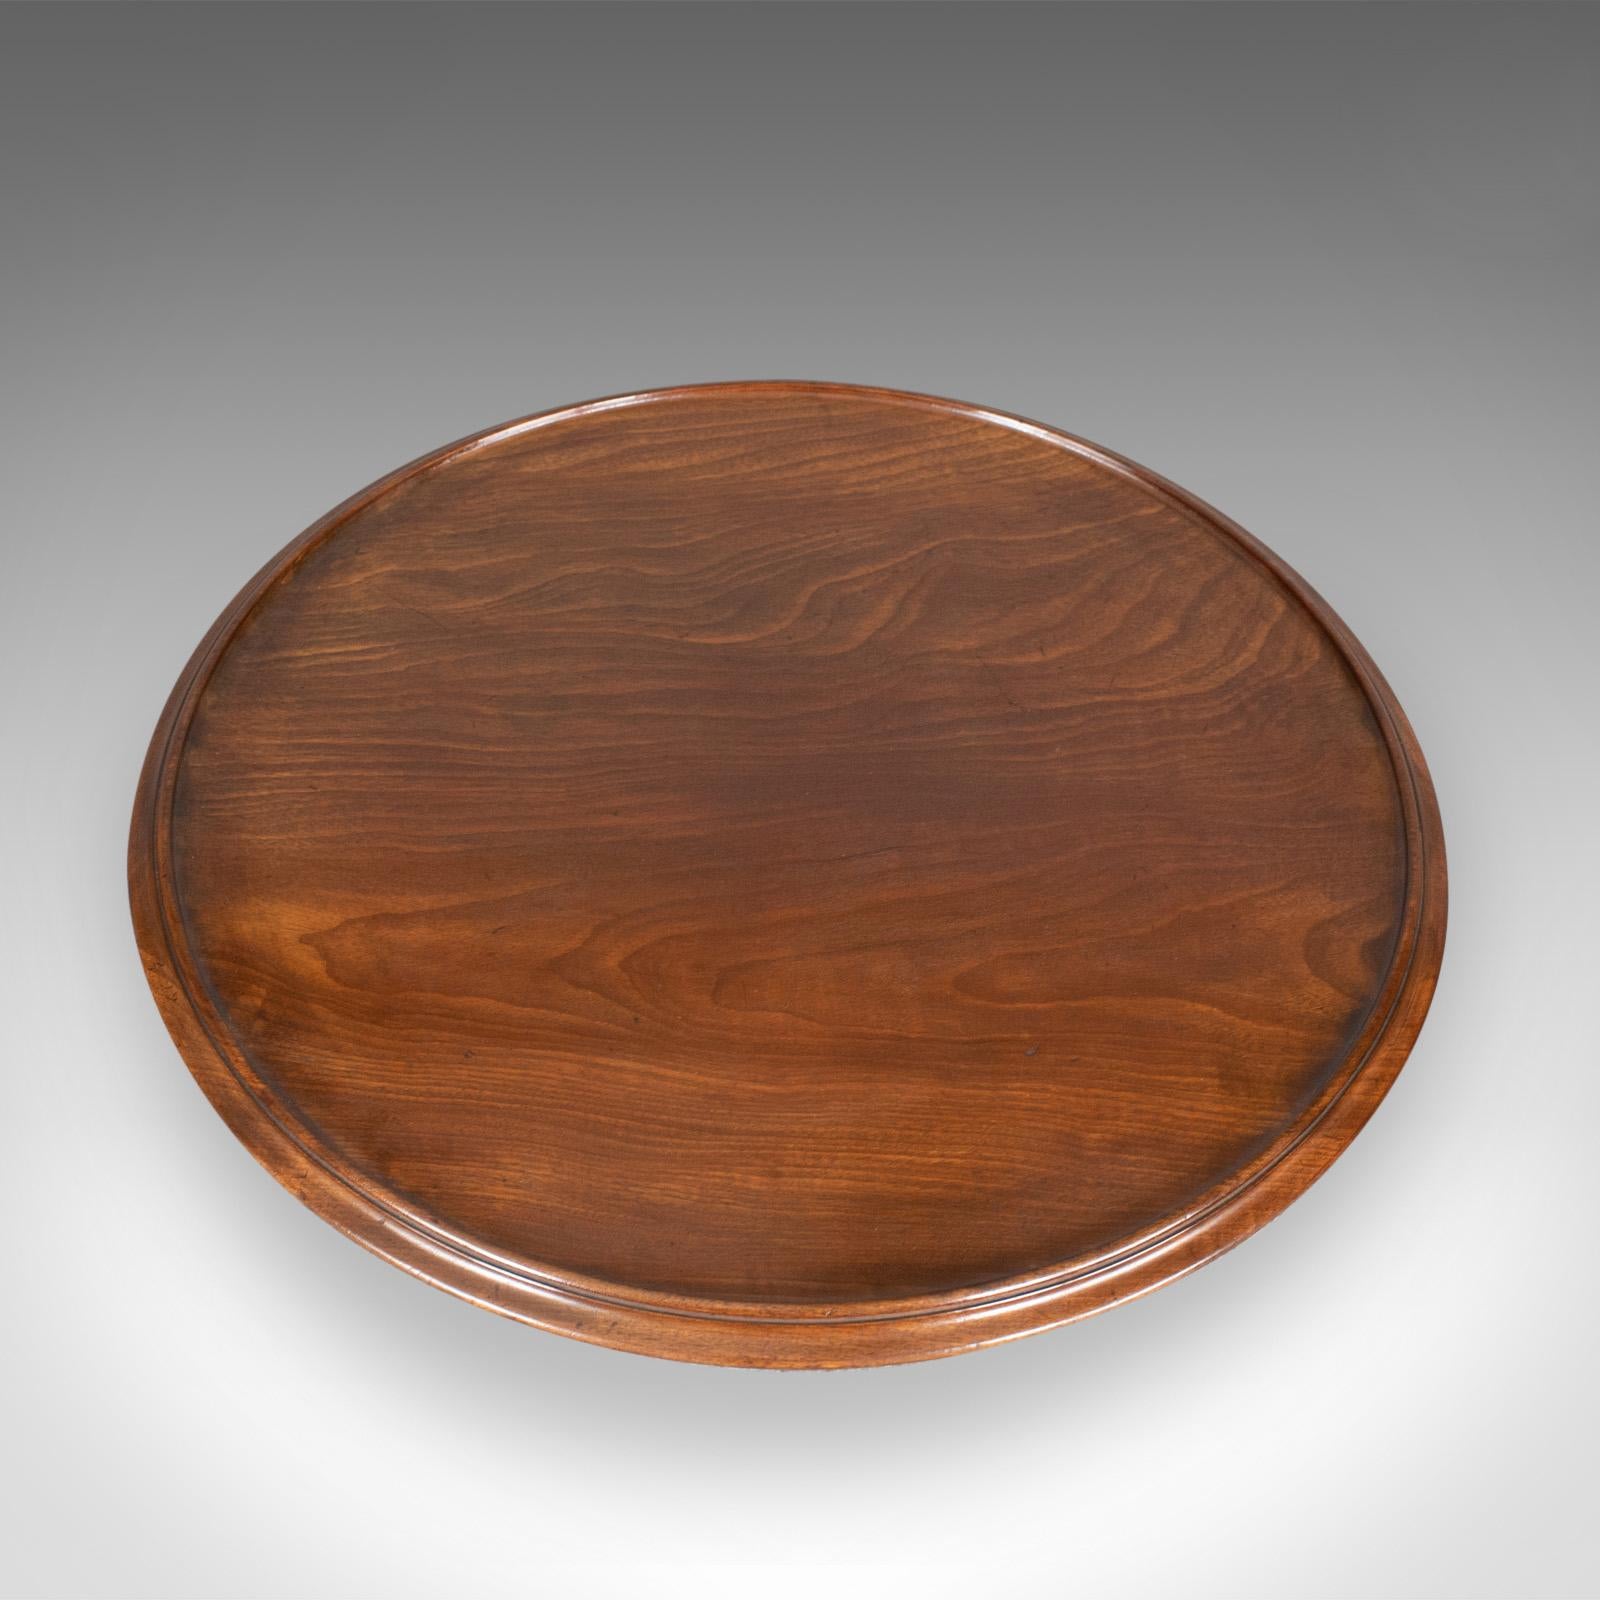 This is an antique Lazy Susan, an English, Georgian, mahogany turntable dating to the late 18th century, circa 1800.

Superior quality in select mahogany
Rich, warm hues with a wax polished finish
Grain interest throughout with a desirable aged